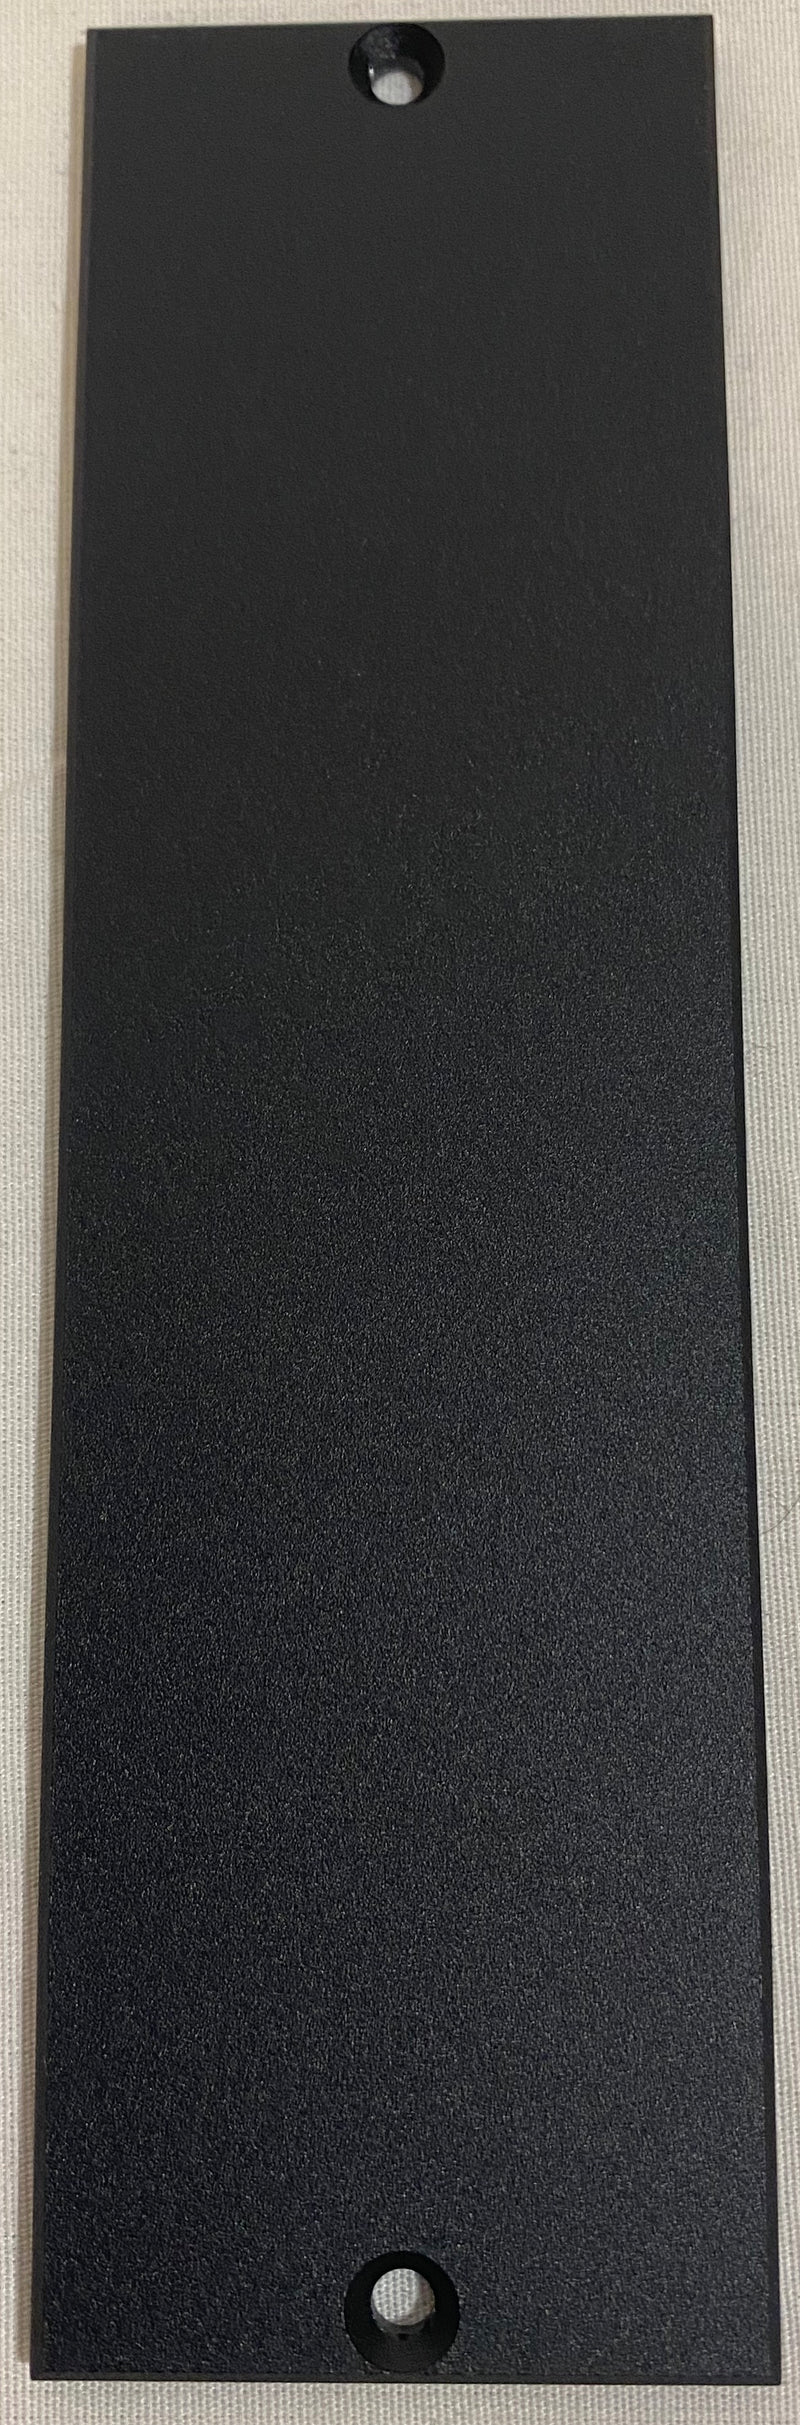 New Fredenstein Black Blank Panel - Black Blank Panel for 500 Series Chassis.